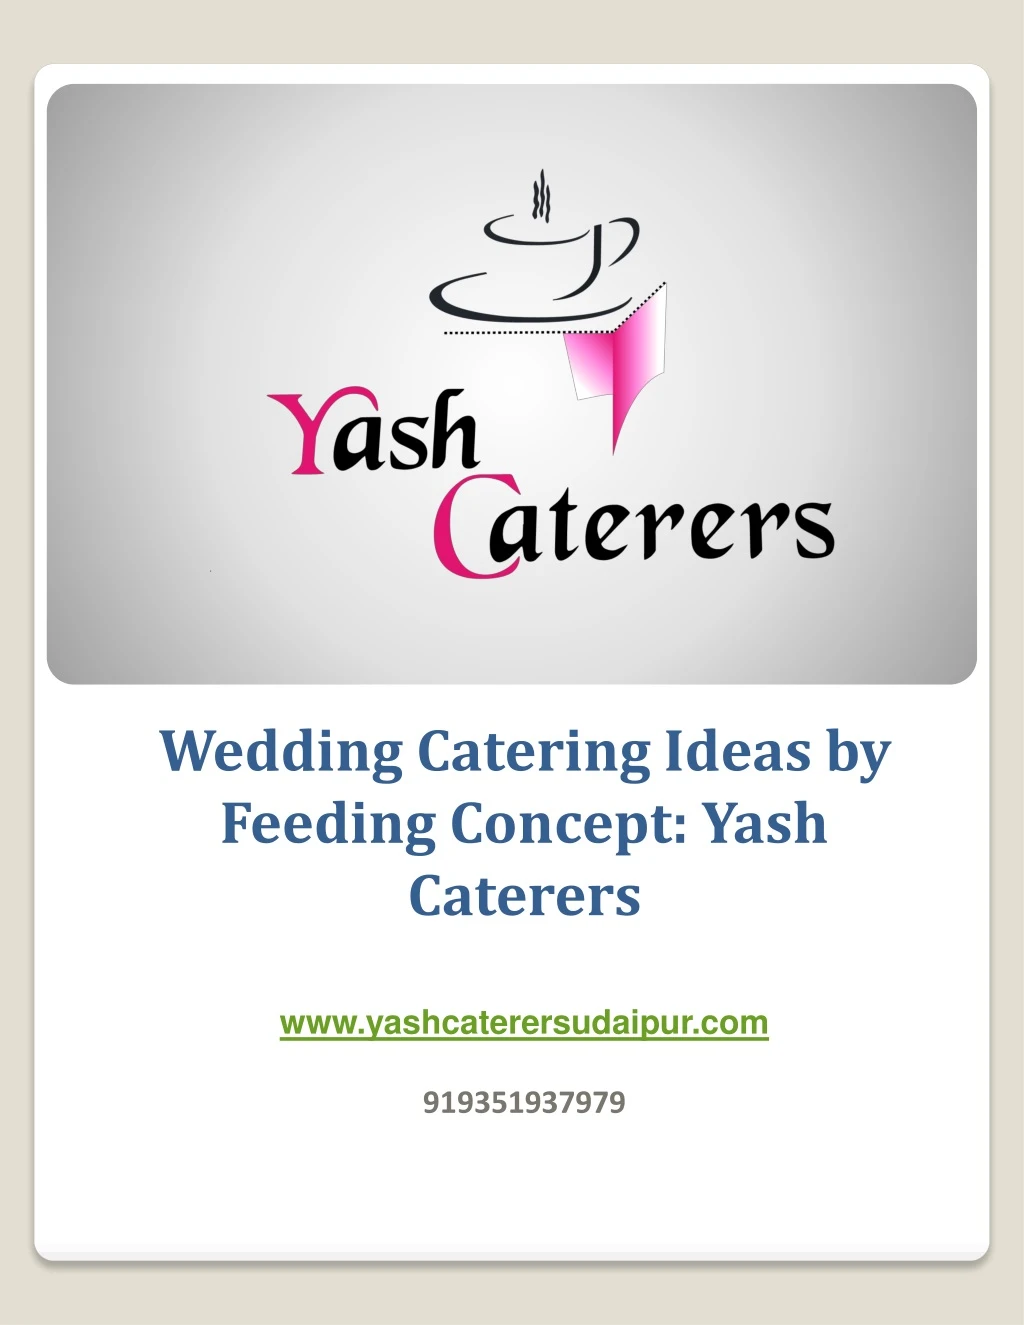 wedding catering ideas by feeding concept yash caterers www yashcaterersudaipur com 9193519379 7 9